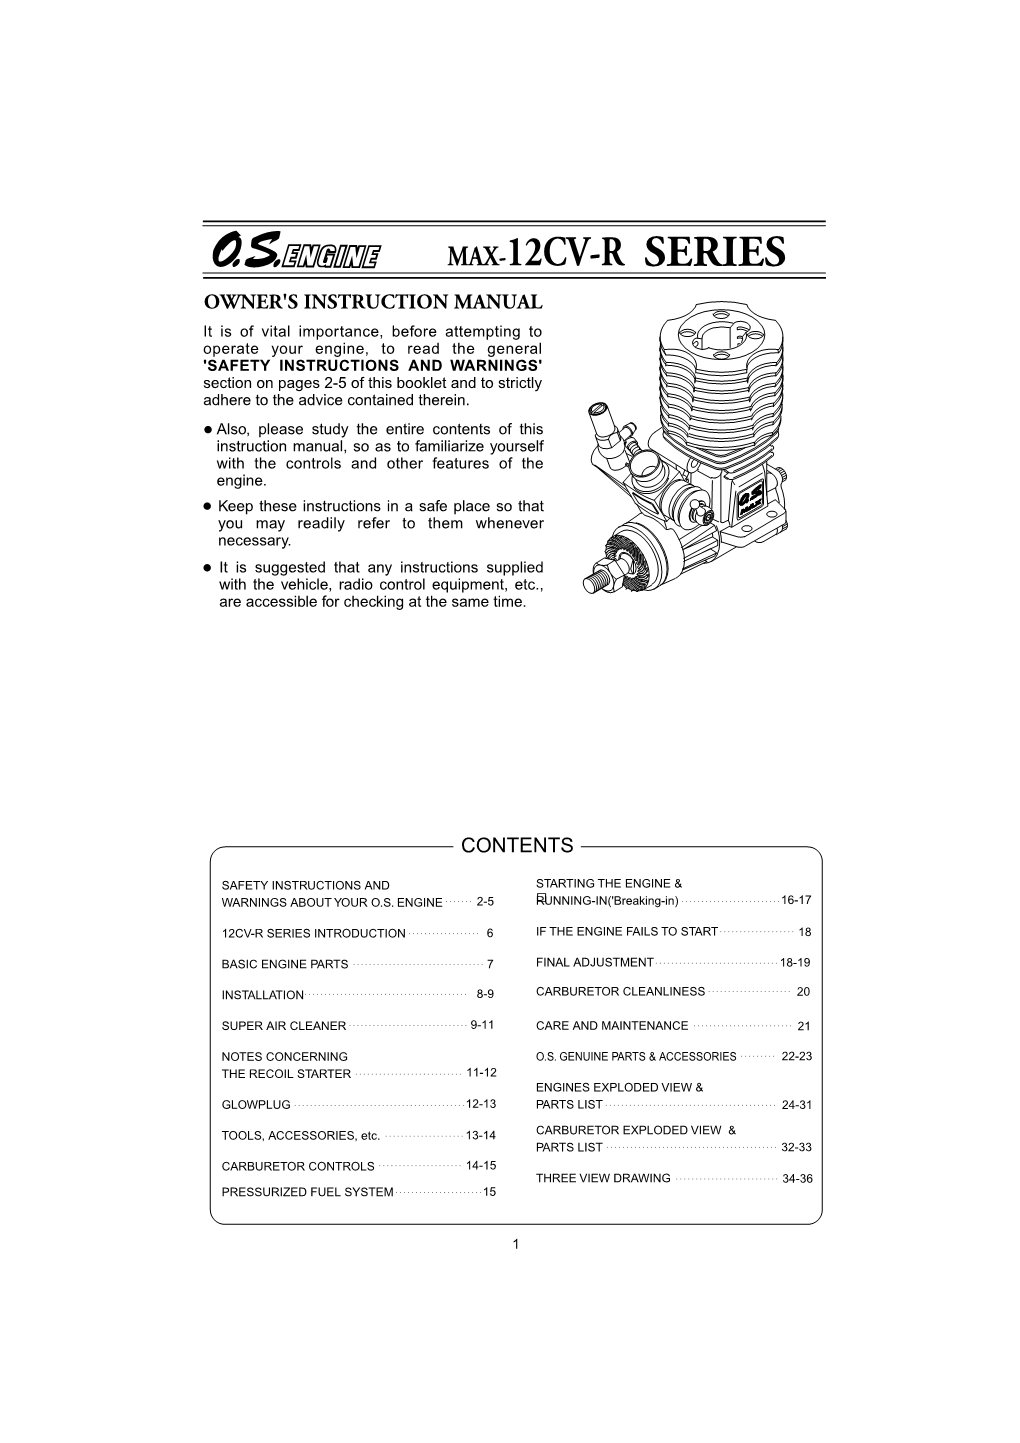 Contents of This Instruction Manual, So As to Familiarize Yourself with the Controls and Other Features of the Engine